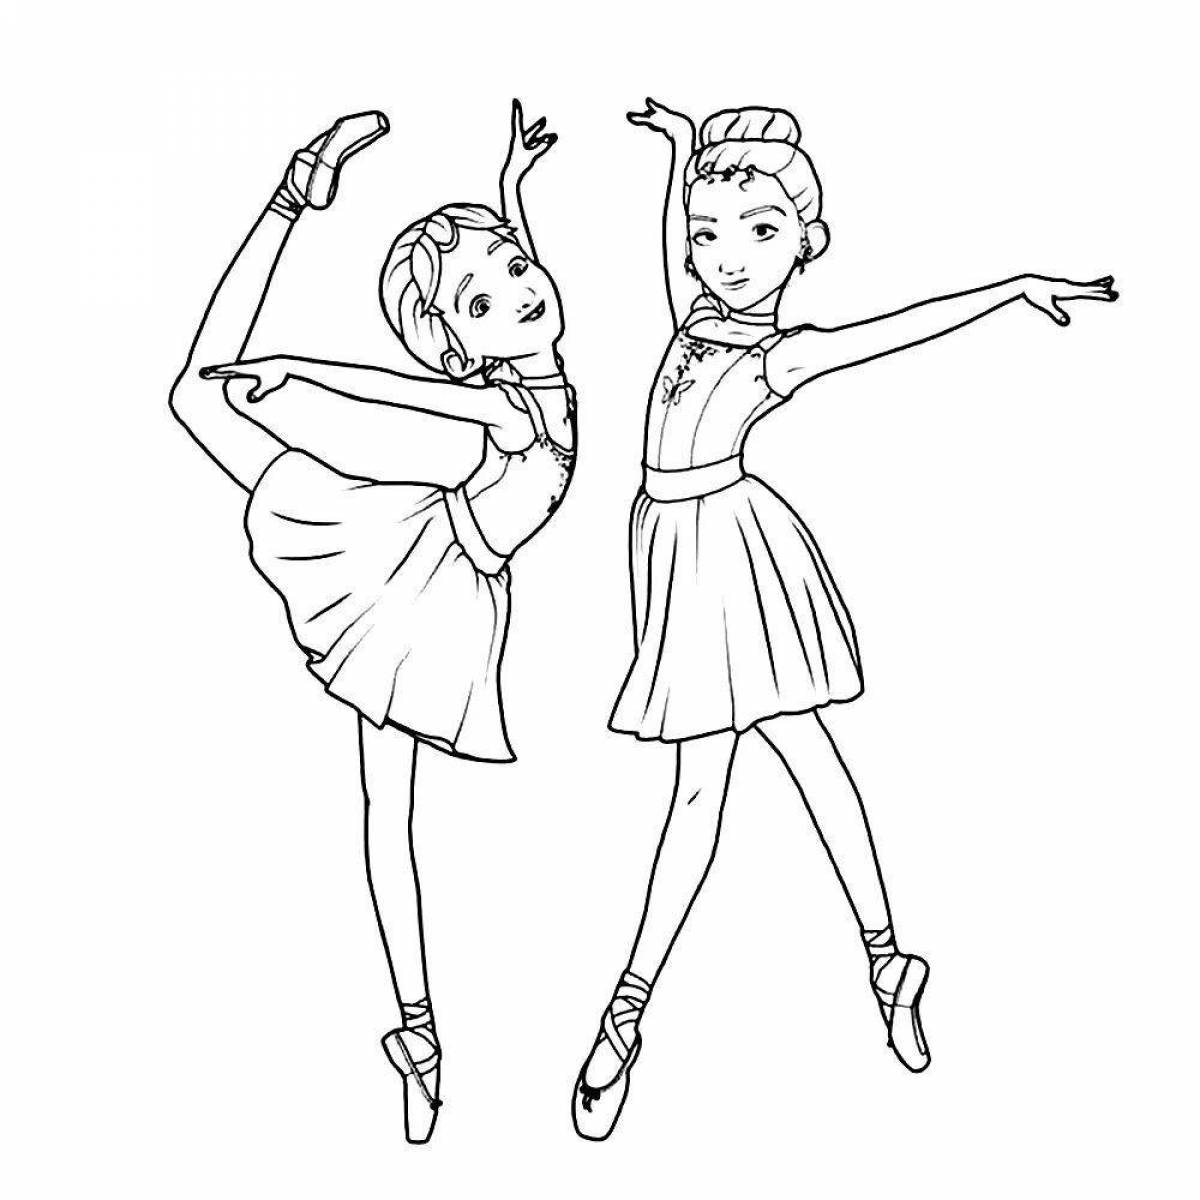 Coloring page nice ballerina